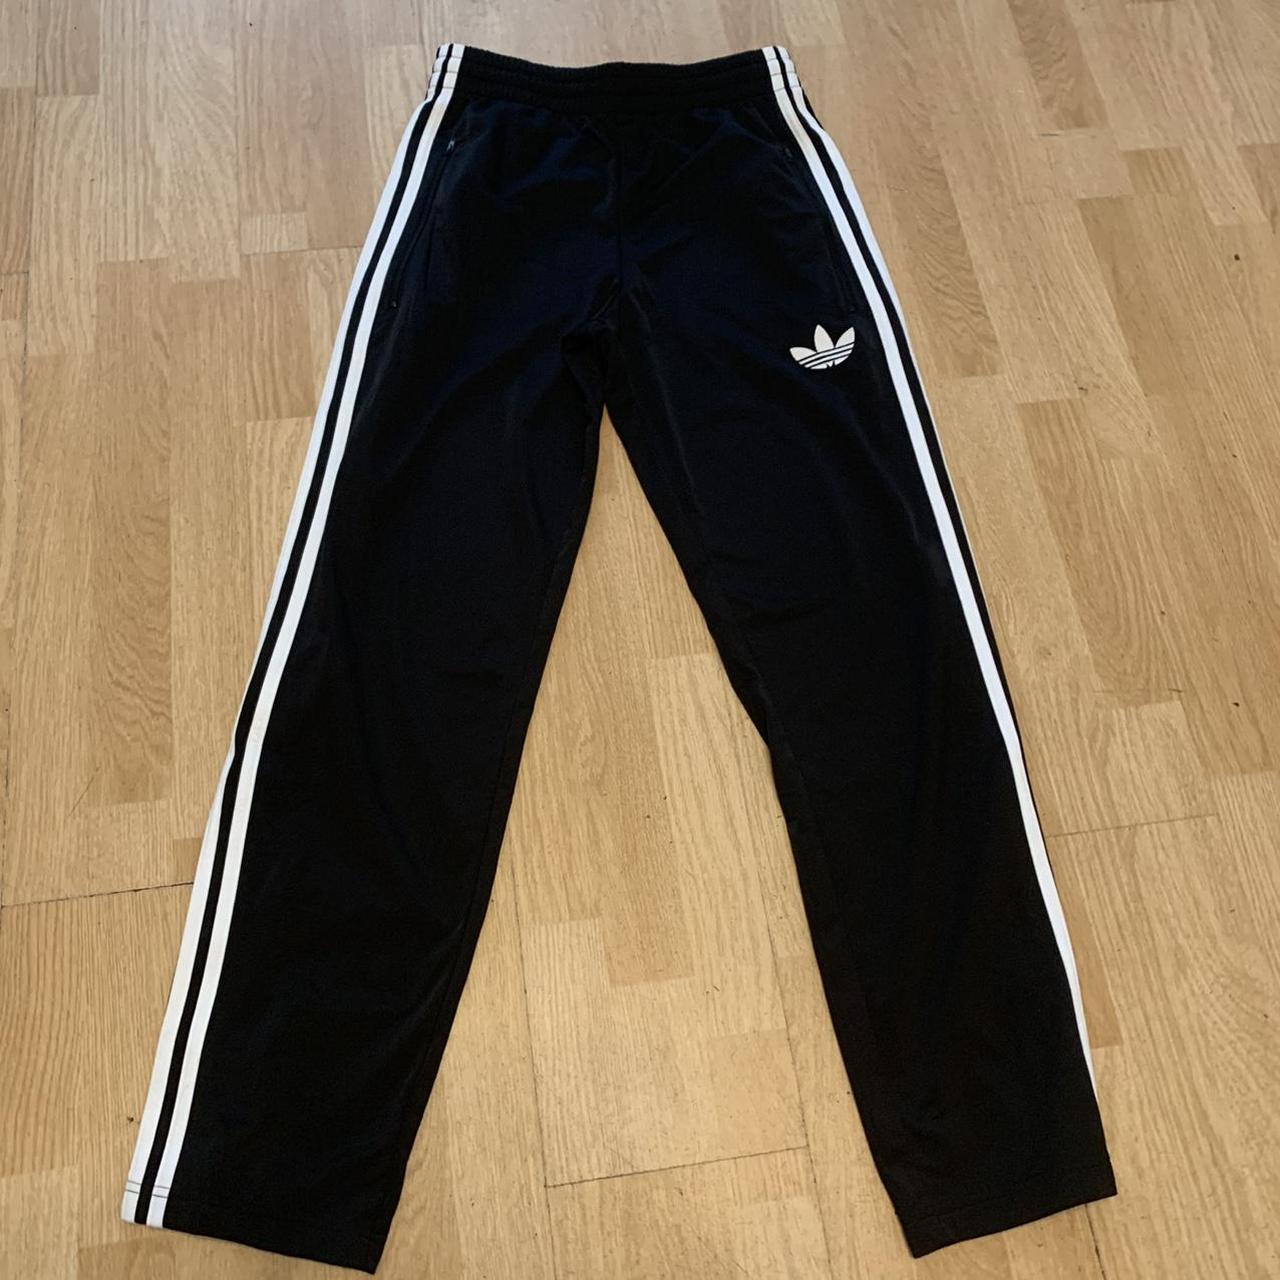 Adidas trackie bottoms Black Great condition Size... - Depop